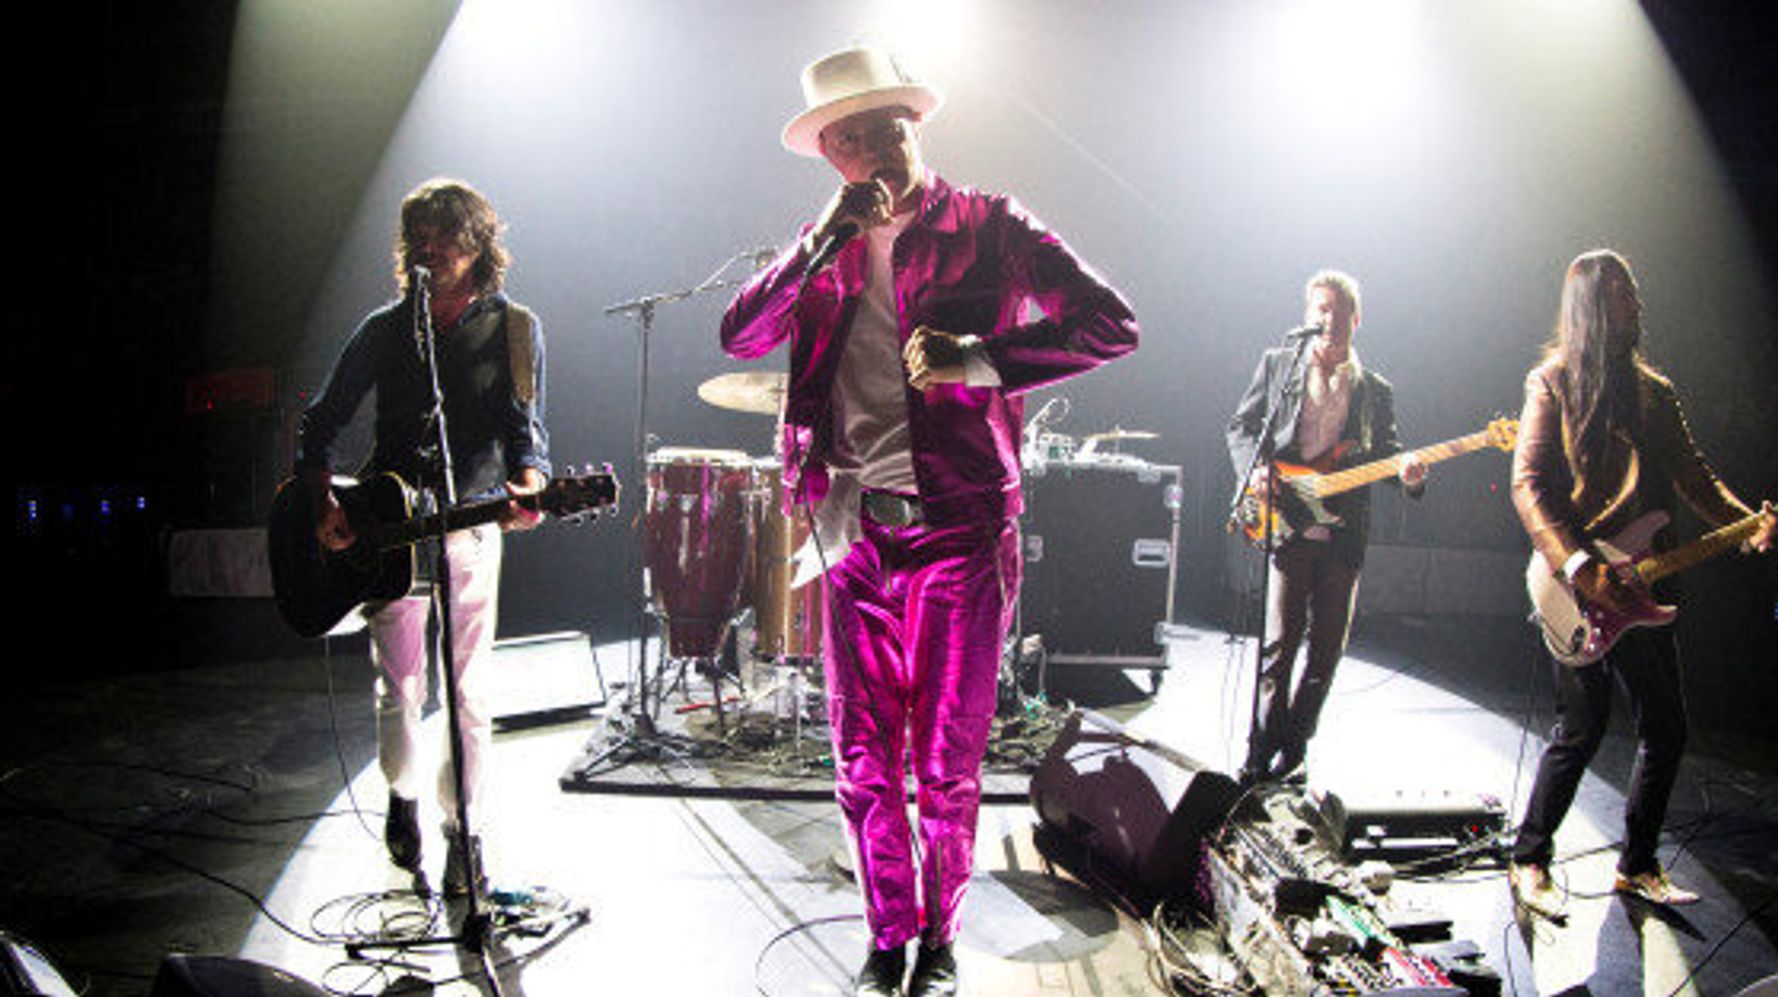 Explaining the importance of The Tragically Hip's final show, Music